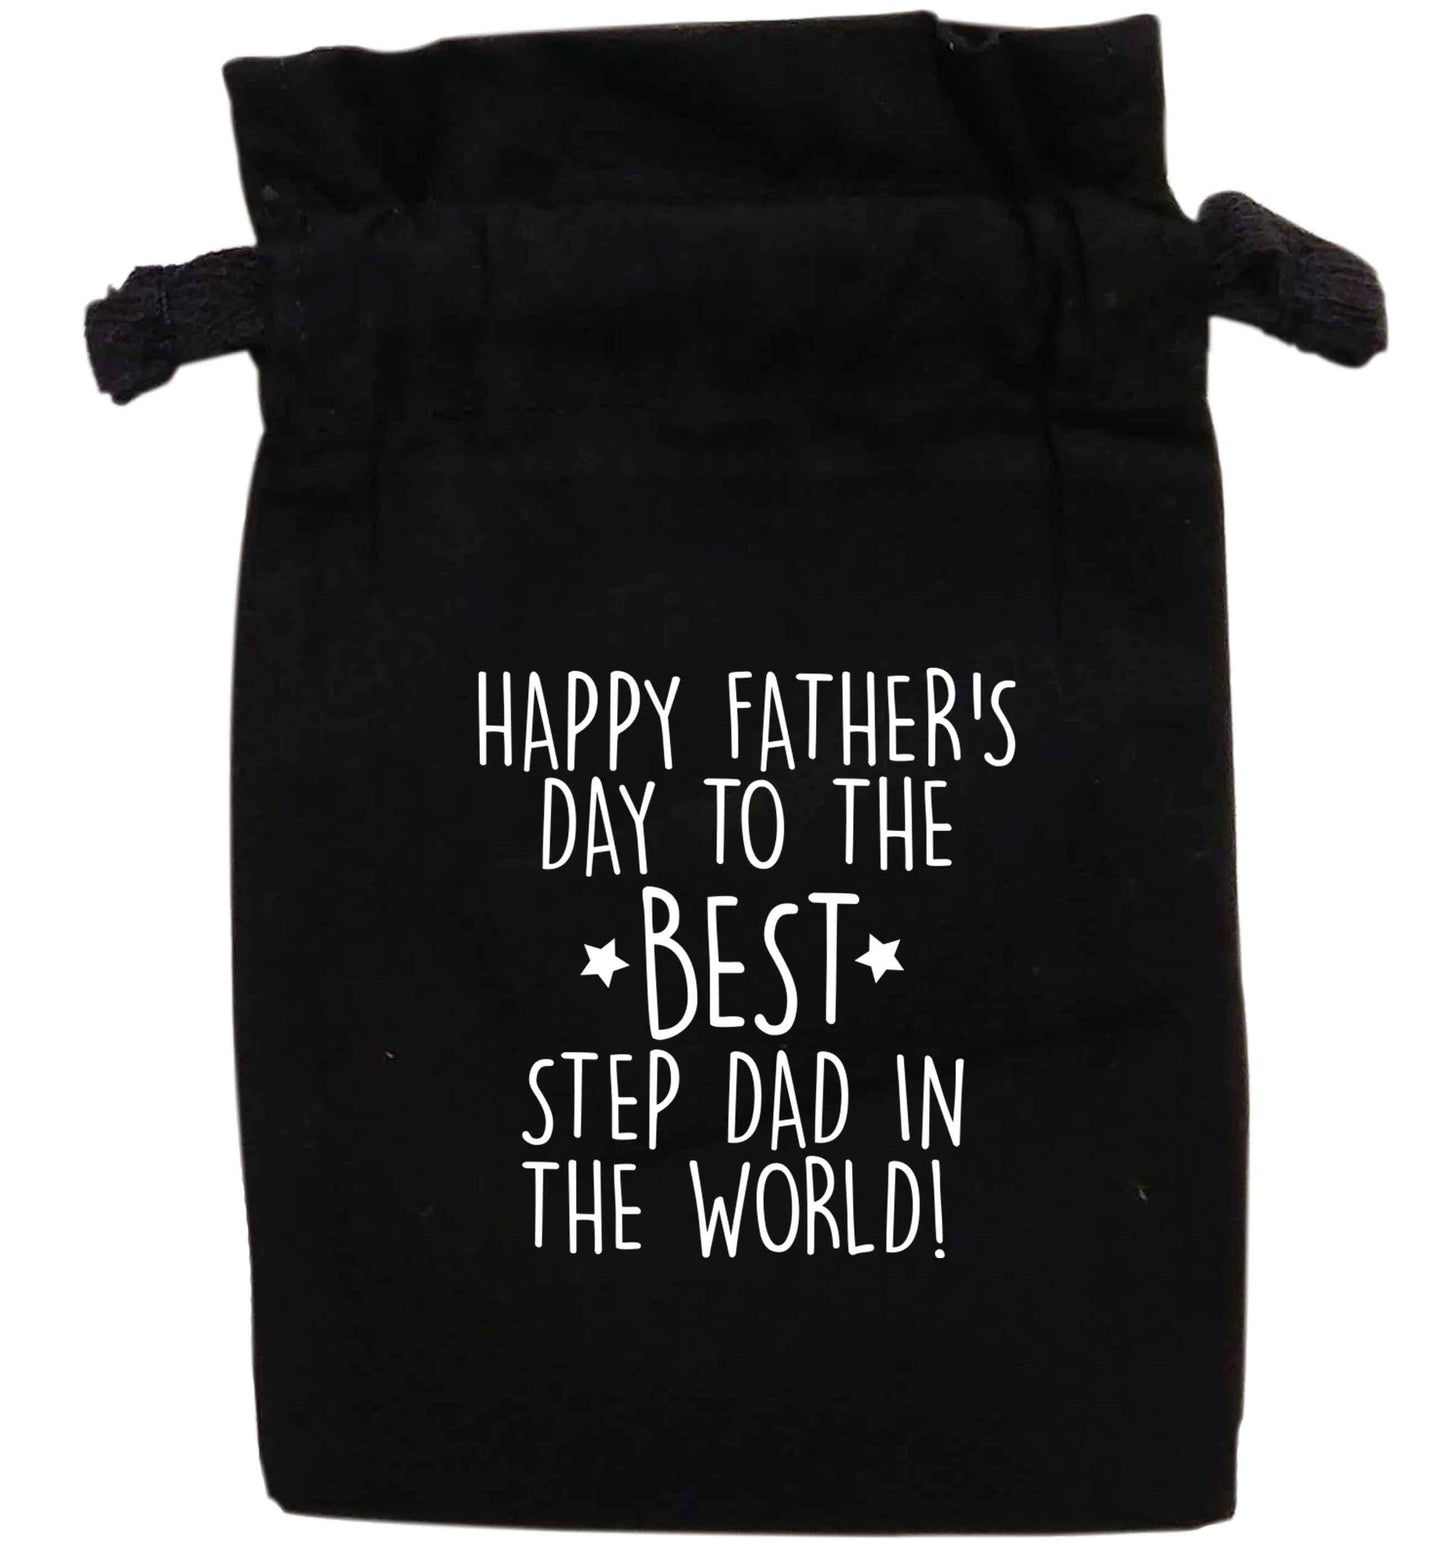 Happy Father's Day to the best step dad in the world! | XS - L | Pouch / Drawstring bag / Sack | Organic Cotton | Bulk discounts available!